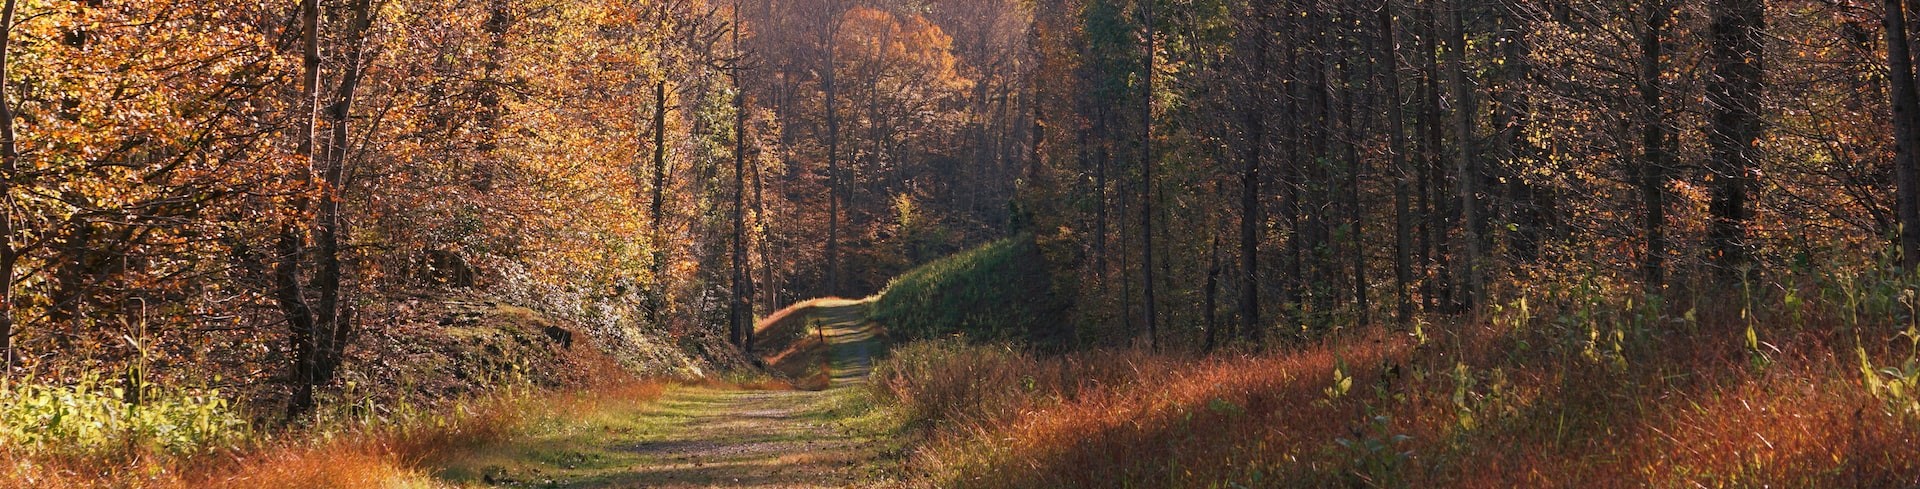 A trail into the woods in the fall | Breast Cancer Car Donations